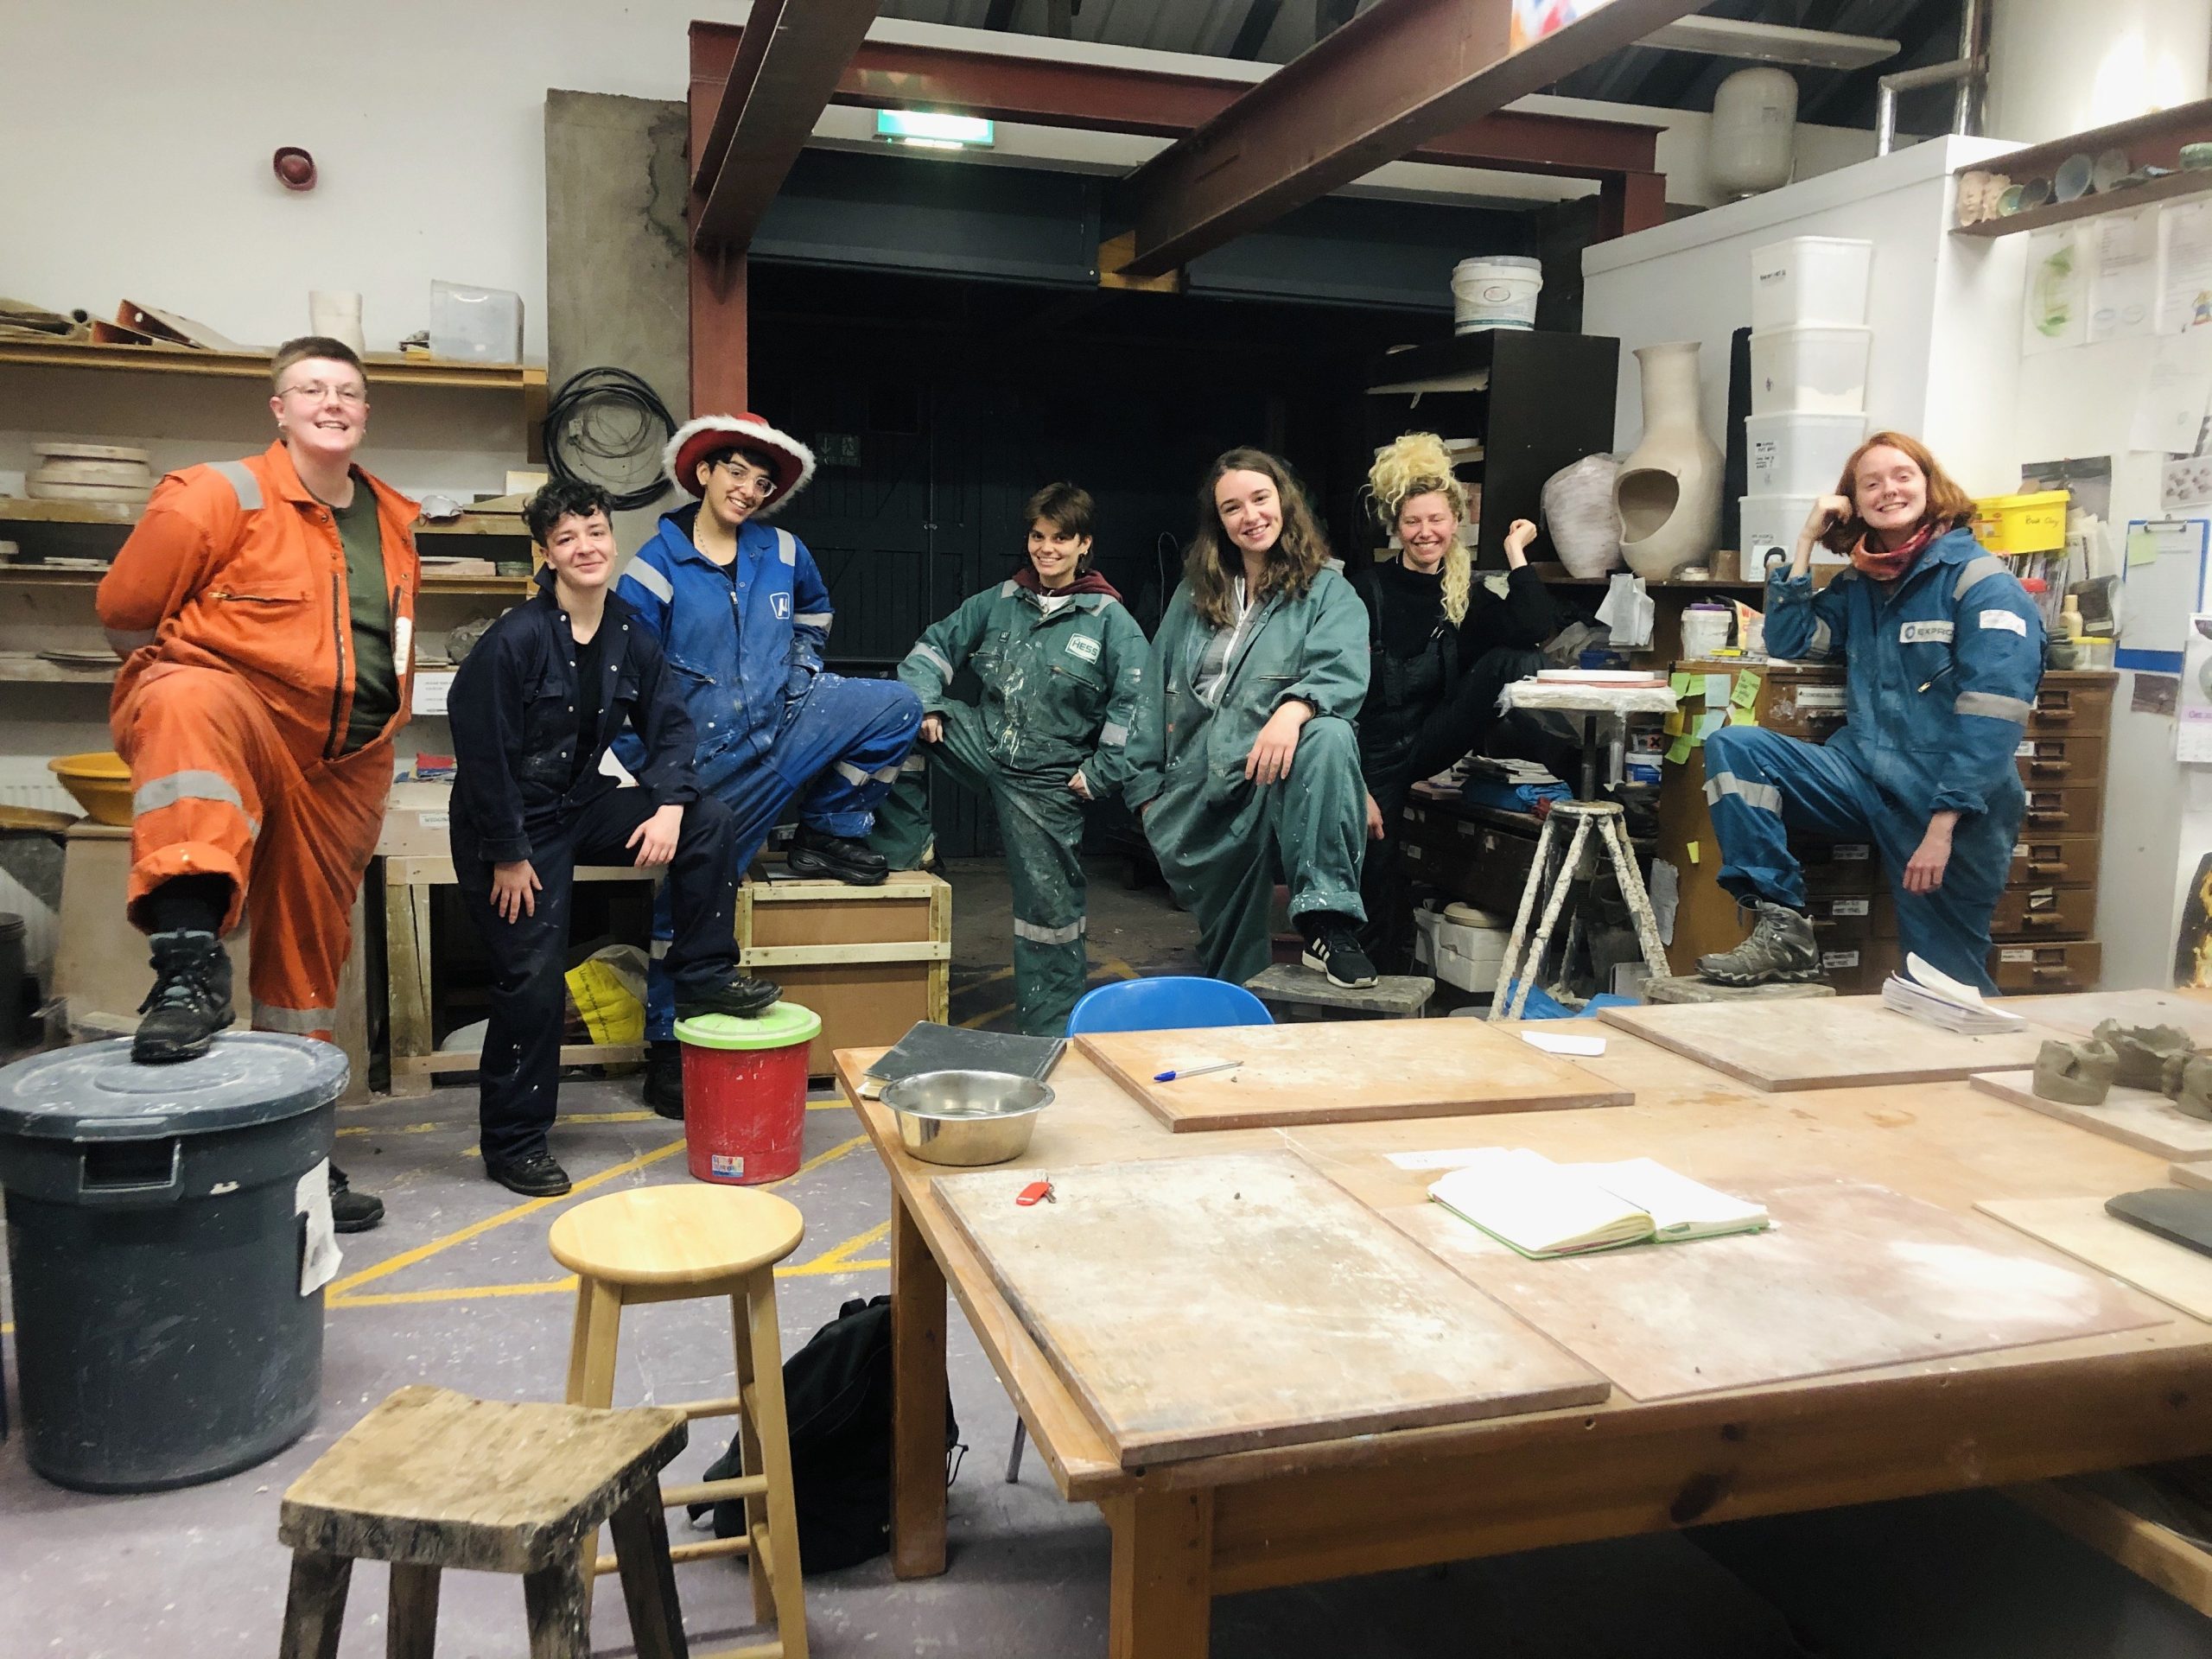 8 trans-masc artist pose in a clay/pottery studio in overalls, one person is wearing a red and white fluffy cowboy hat